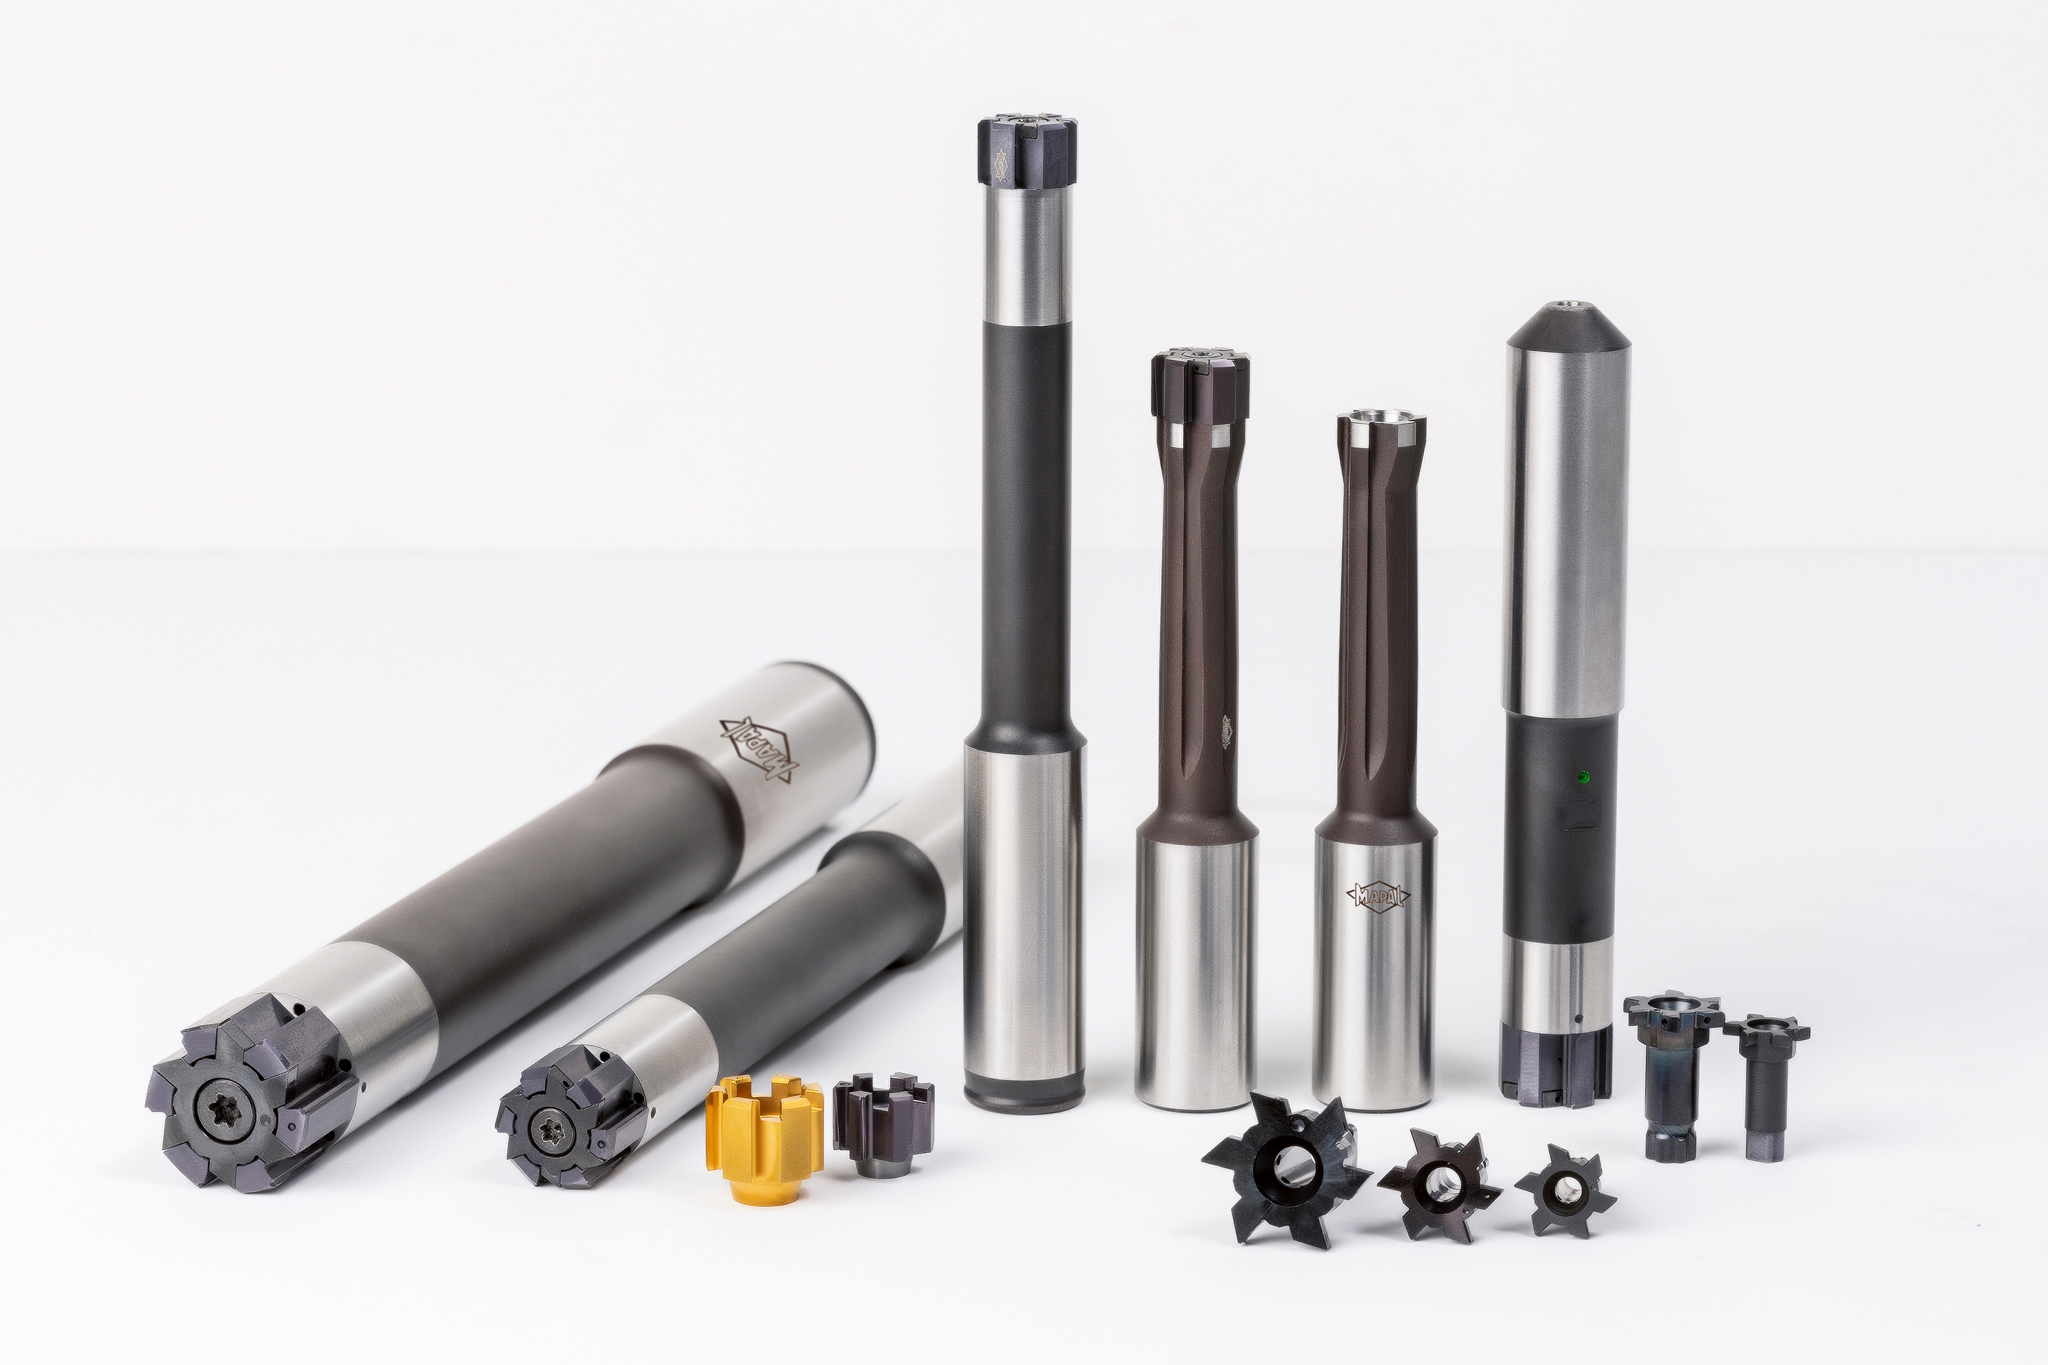 The picture shows a representative selection of holders and exchangeable heads from the MAPAL Press-to-Size-Reamer range.